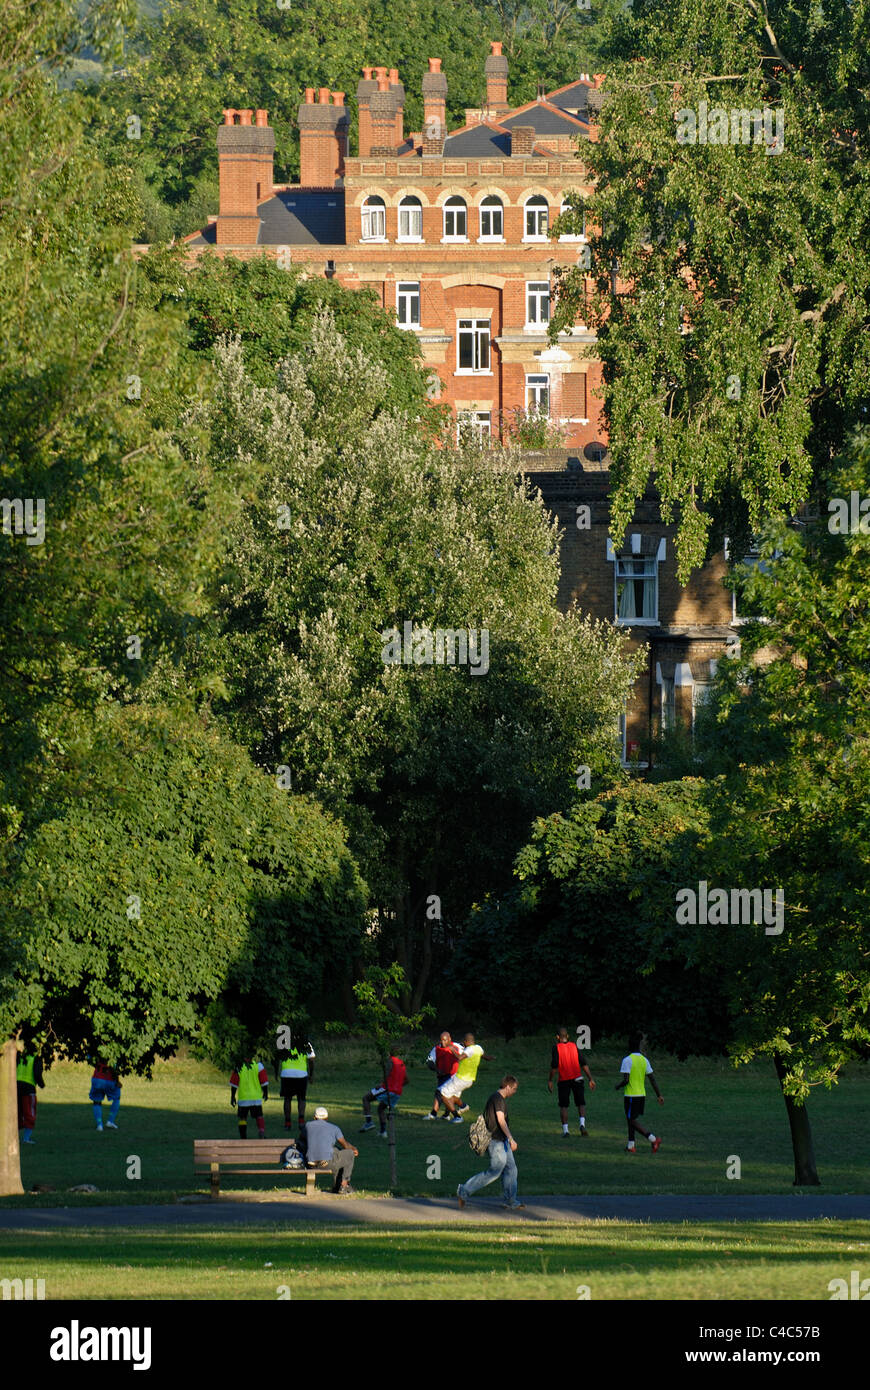 Park scene, football in evening light and mansion in the background, Brockwell Park, Herne Hill, SE London Stock Photo